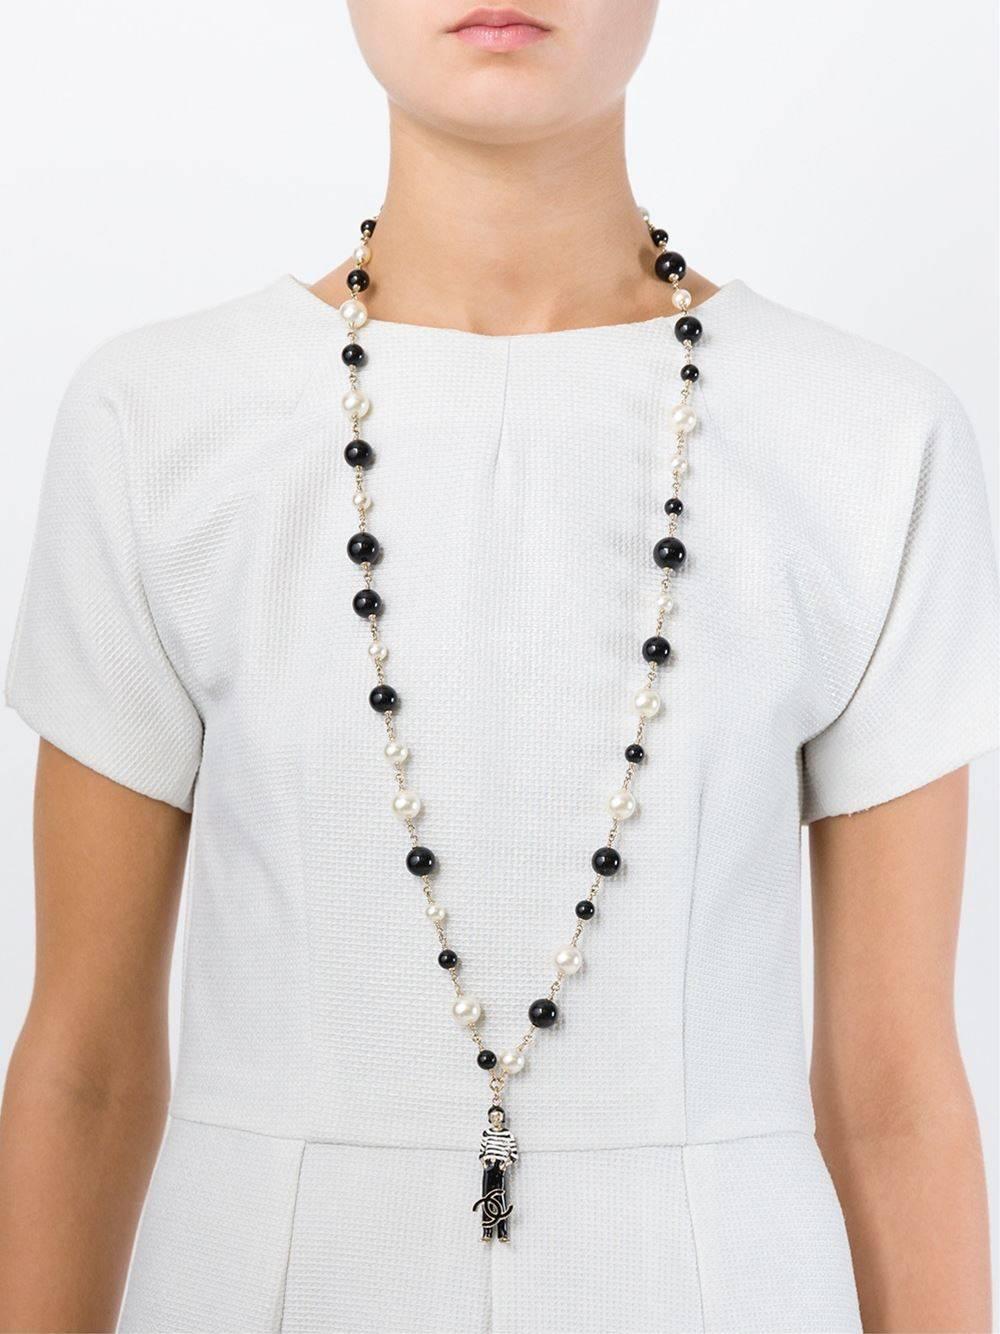 Black and white Coco Chanel pendant necklace featuring a lobster claw fastening and multiple glass beads and faux pearls. 

Colour: Black, White

Material: Glass 40% Plastic 10% Metal (Other) 50%

Measurements: L: 46cm Pendant L: 5cm Pendant